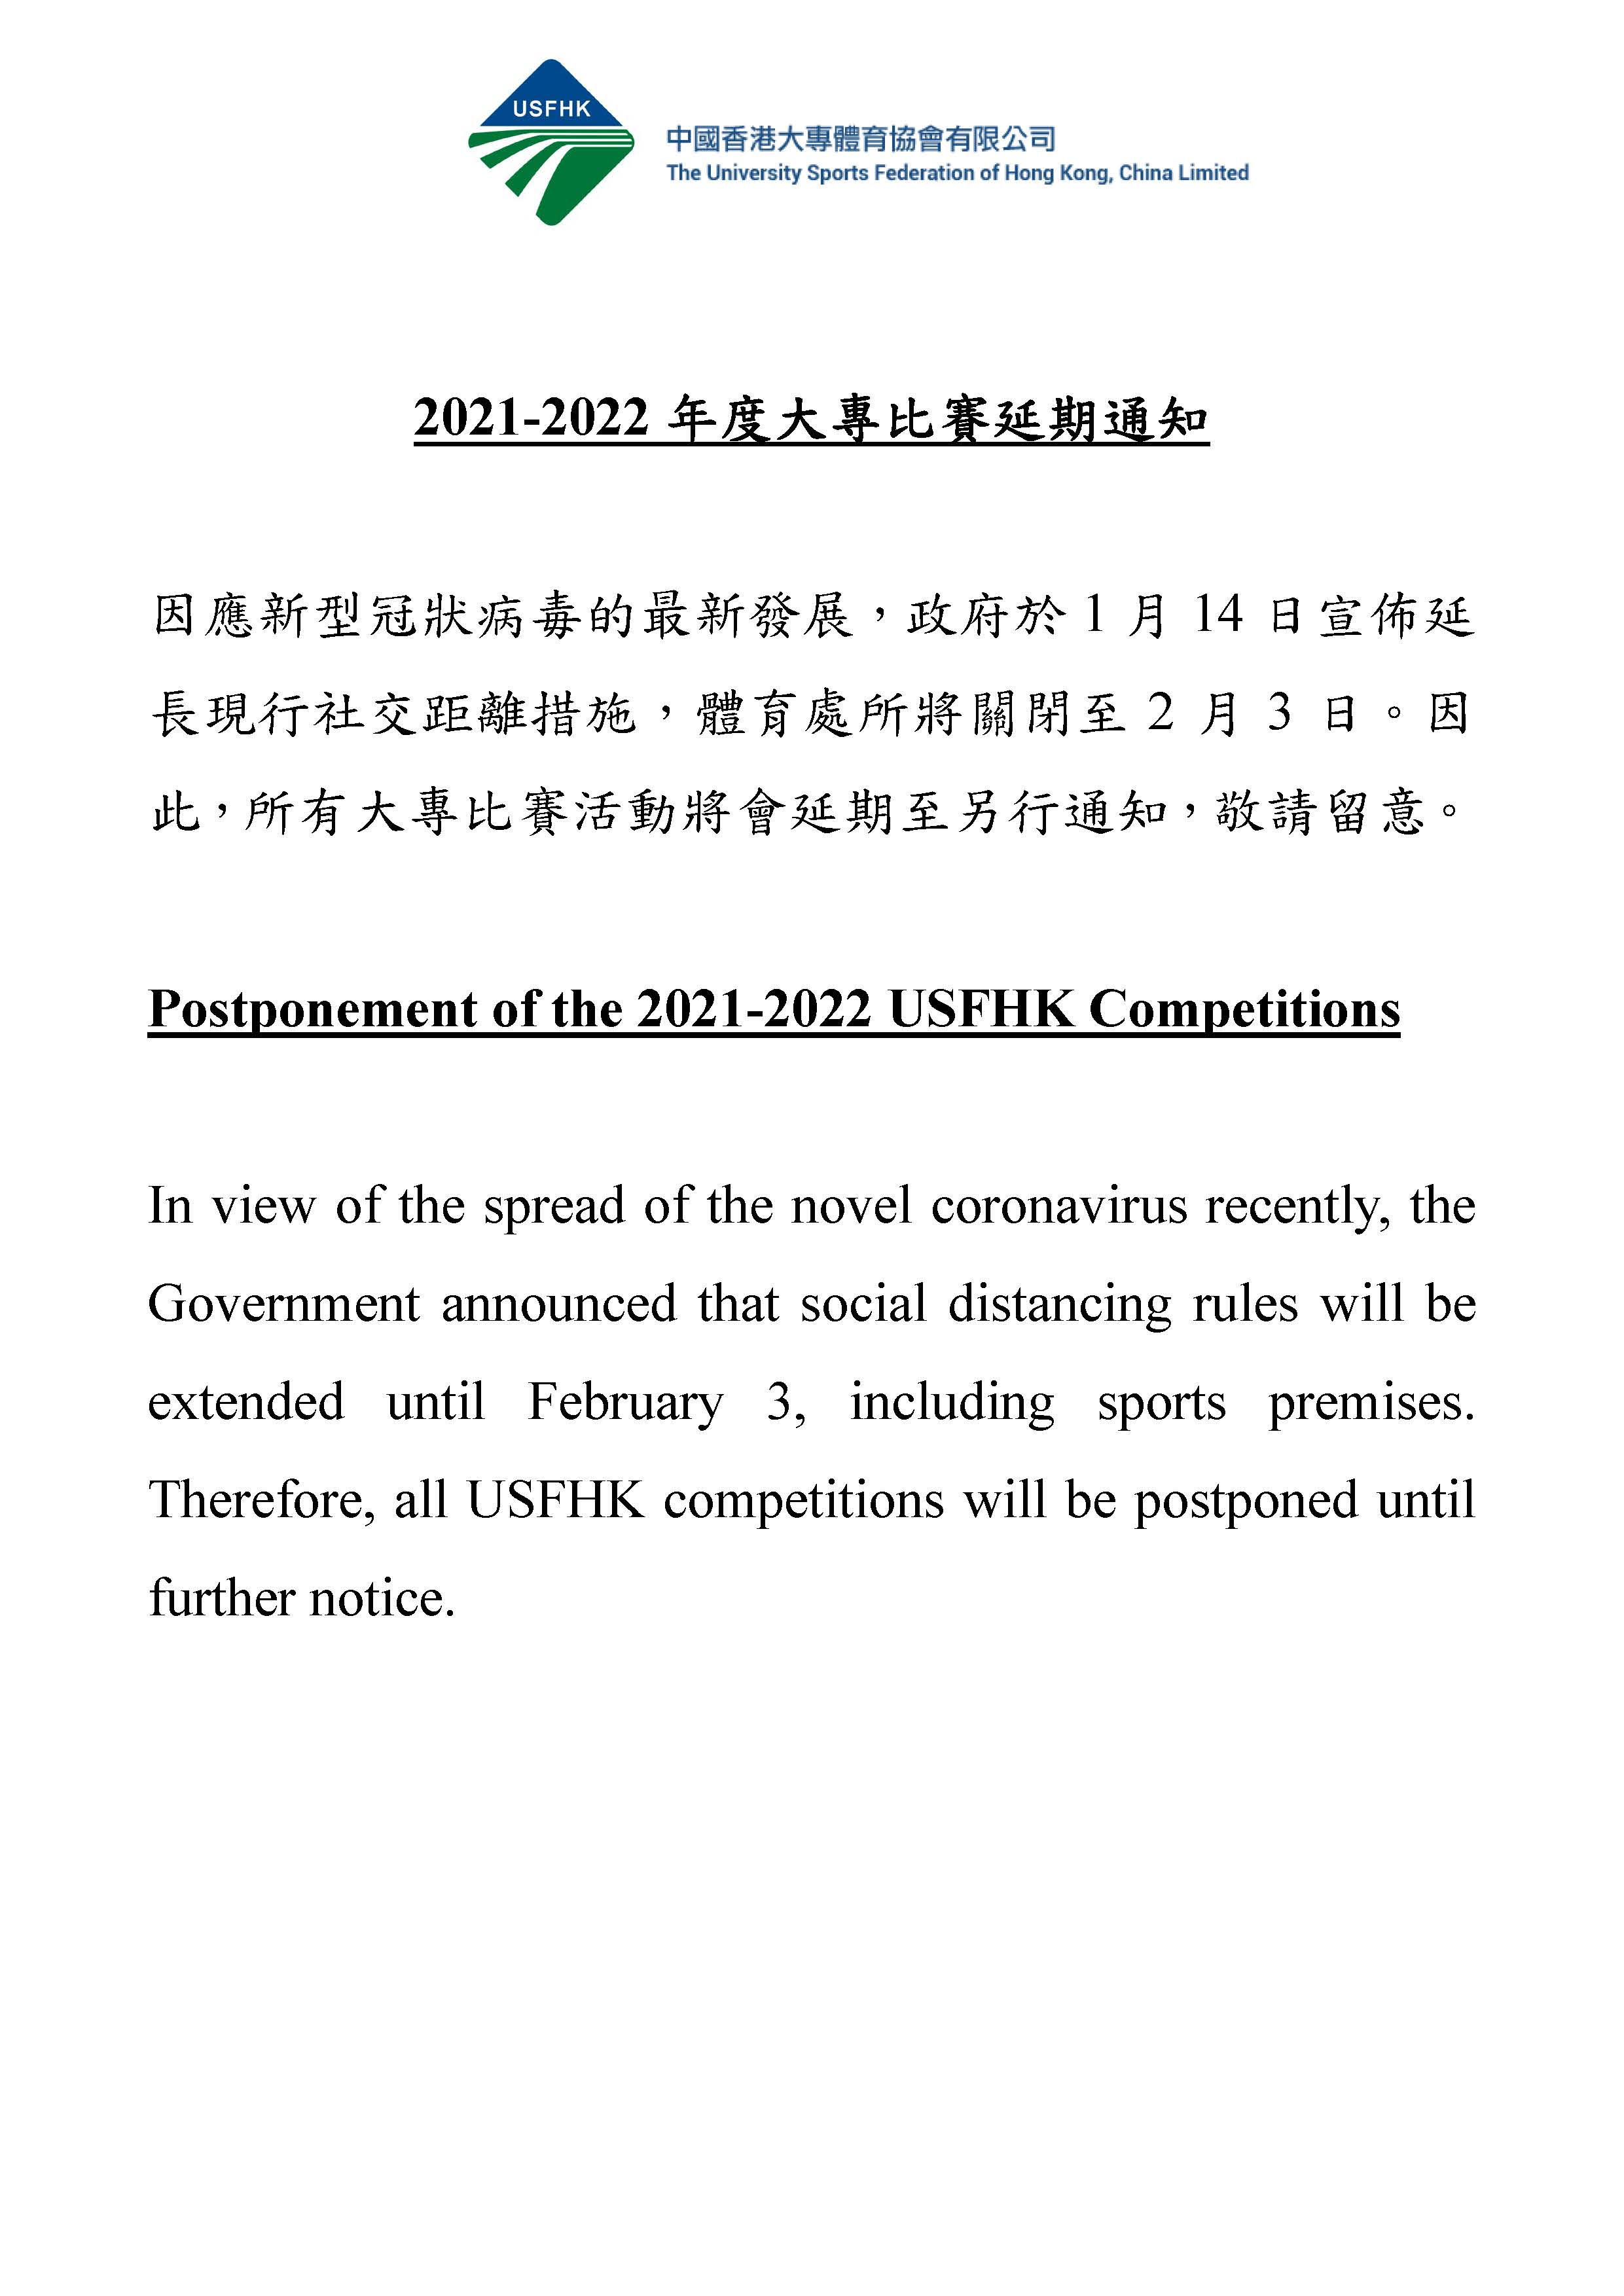 Postponement of the 2021-2022 USFHK Competitions